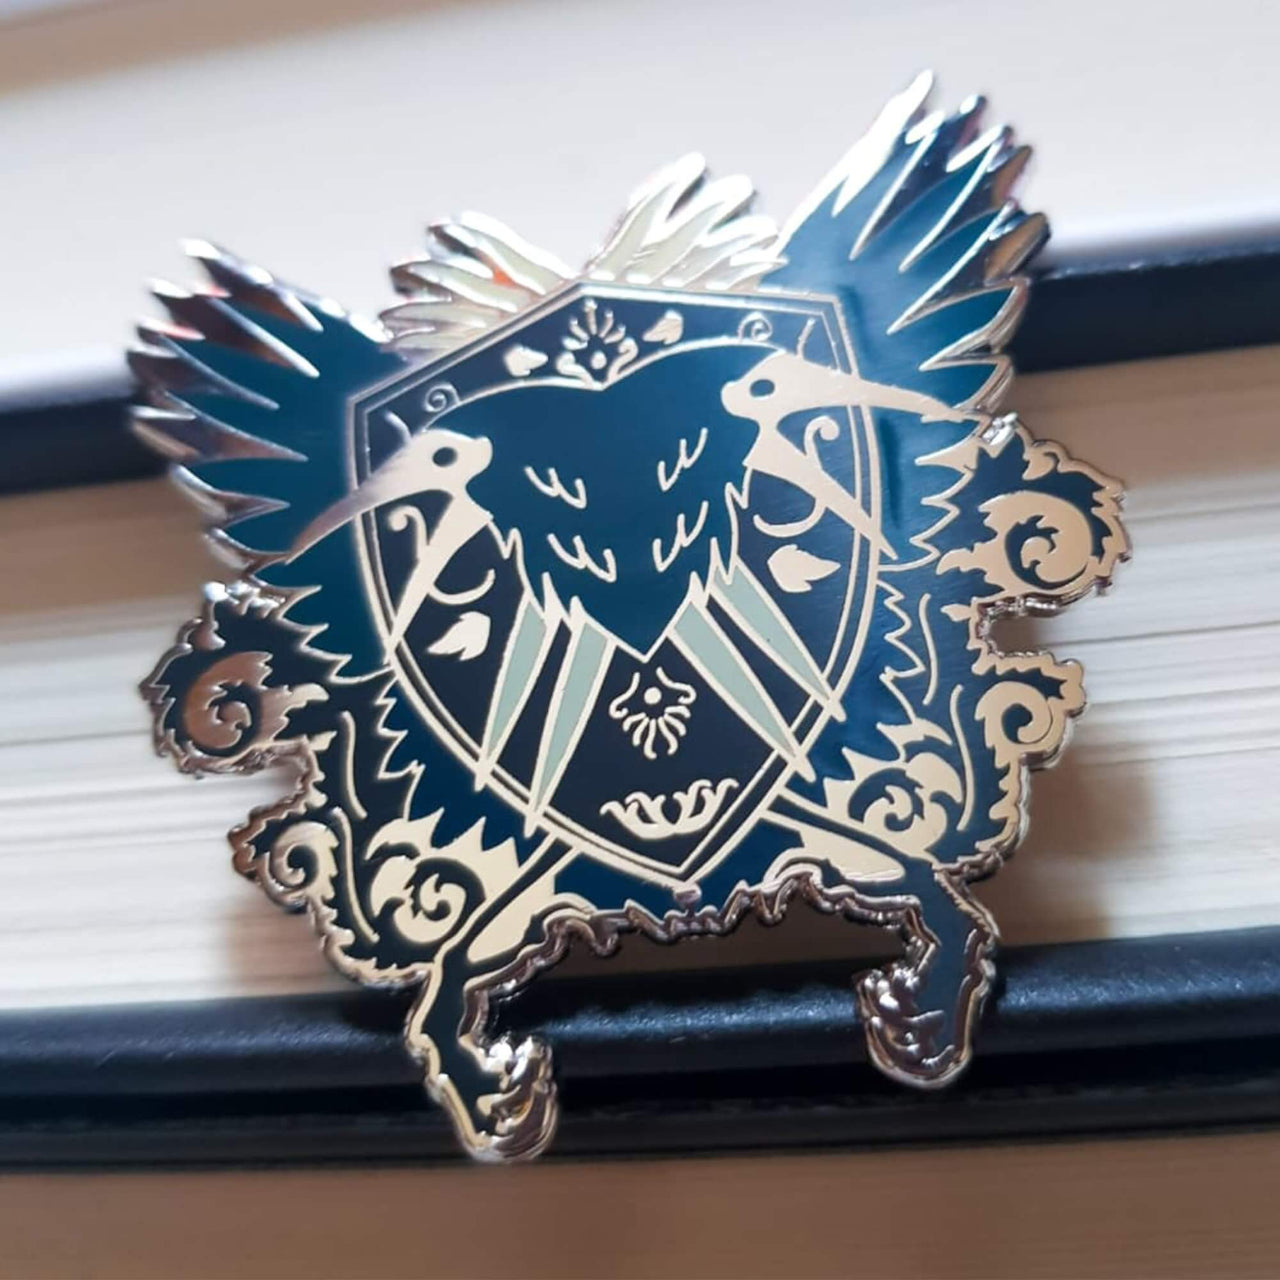 The Anserys House Crest enamel pin inspired by A Throne of Swans by Katherine and Elizabeth Corr